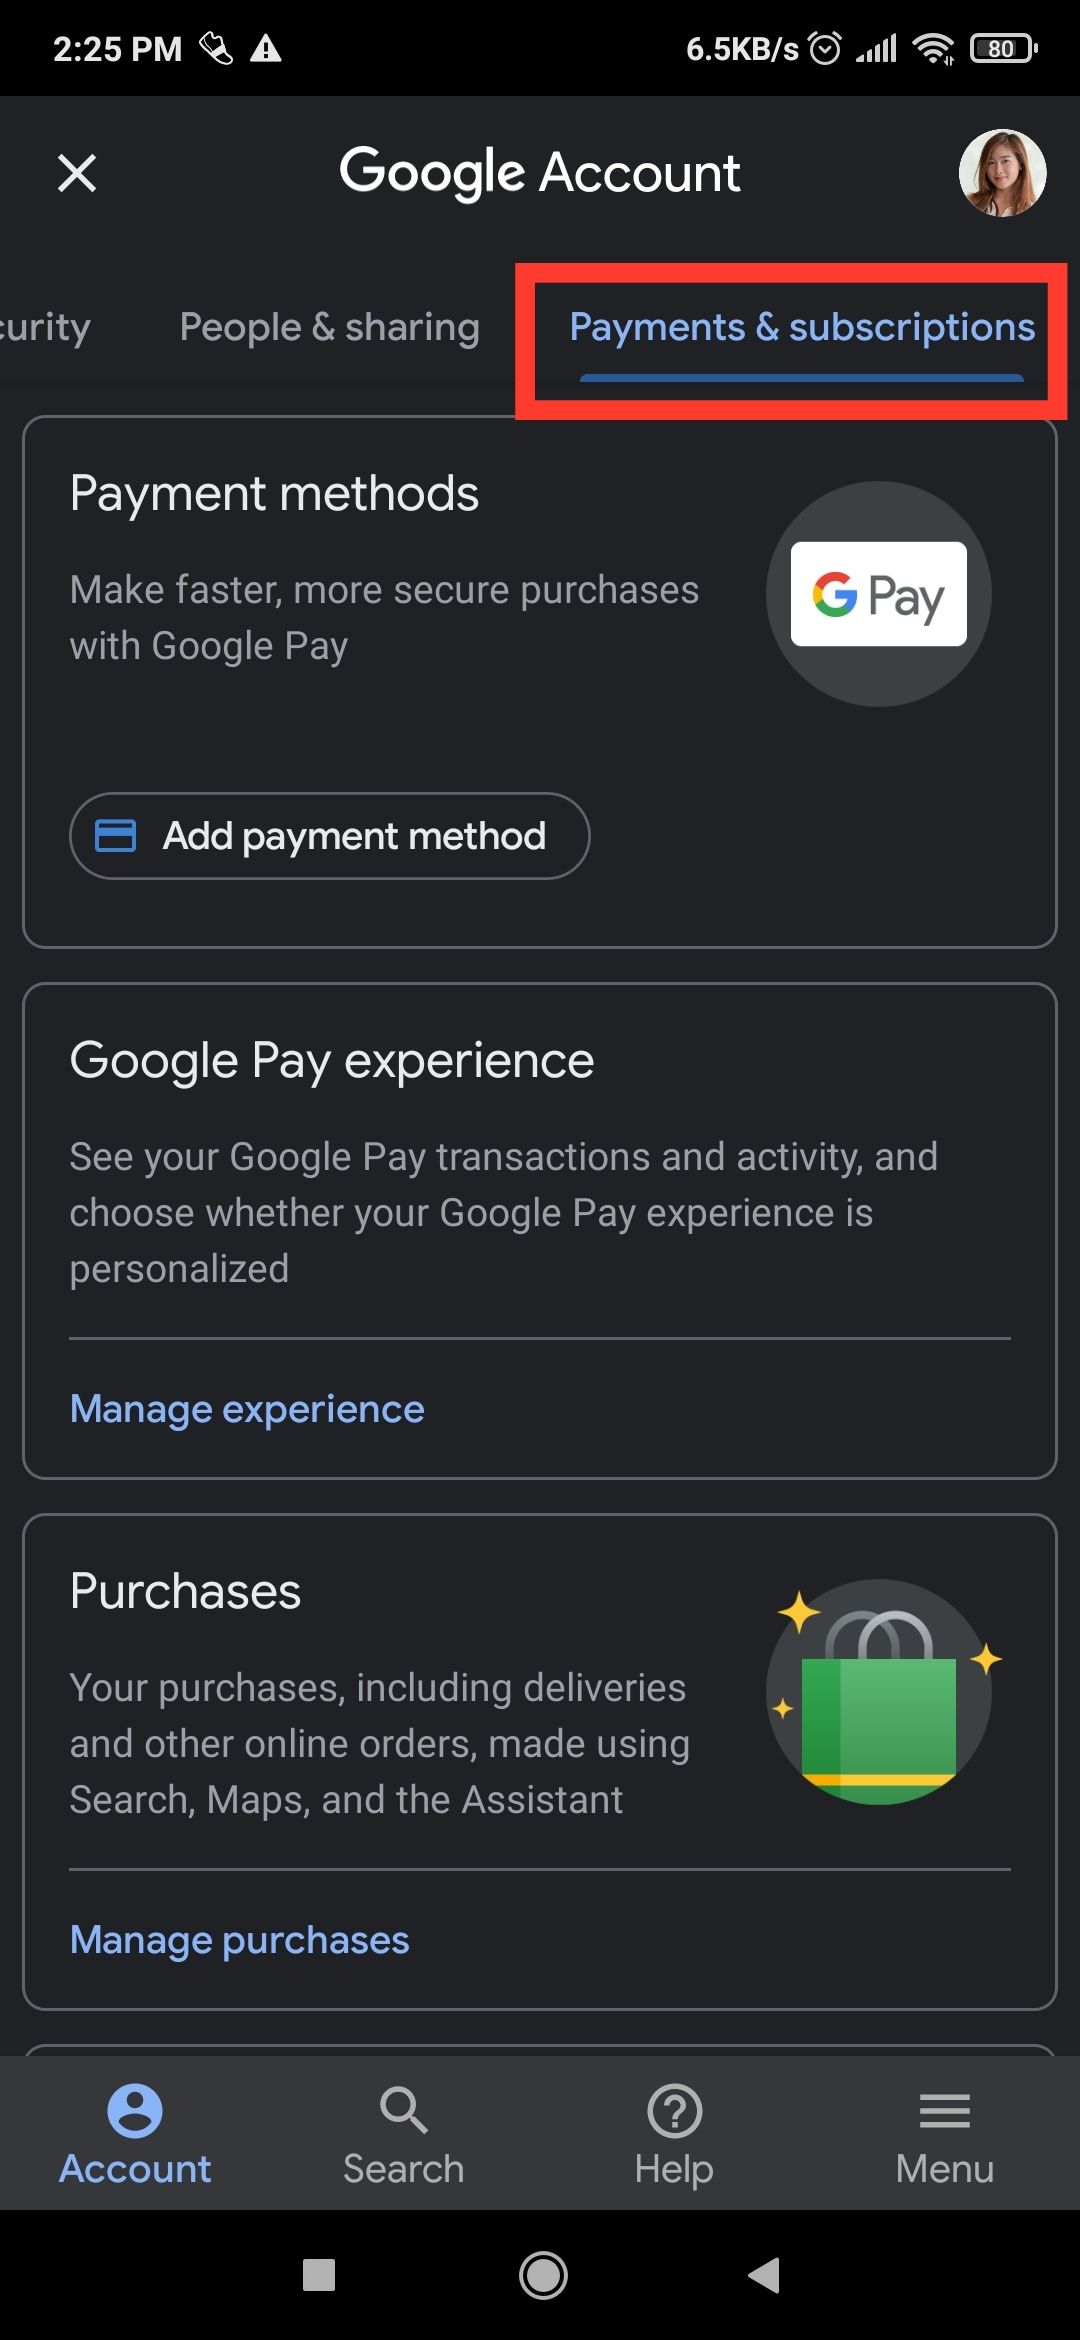 Payments and Subscriptions